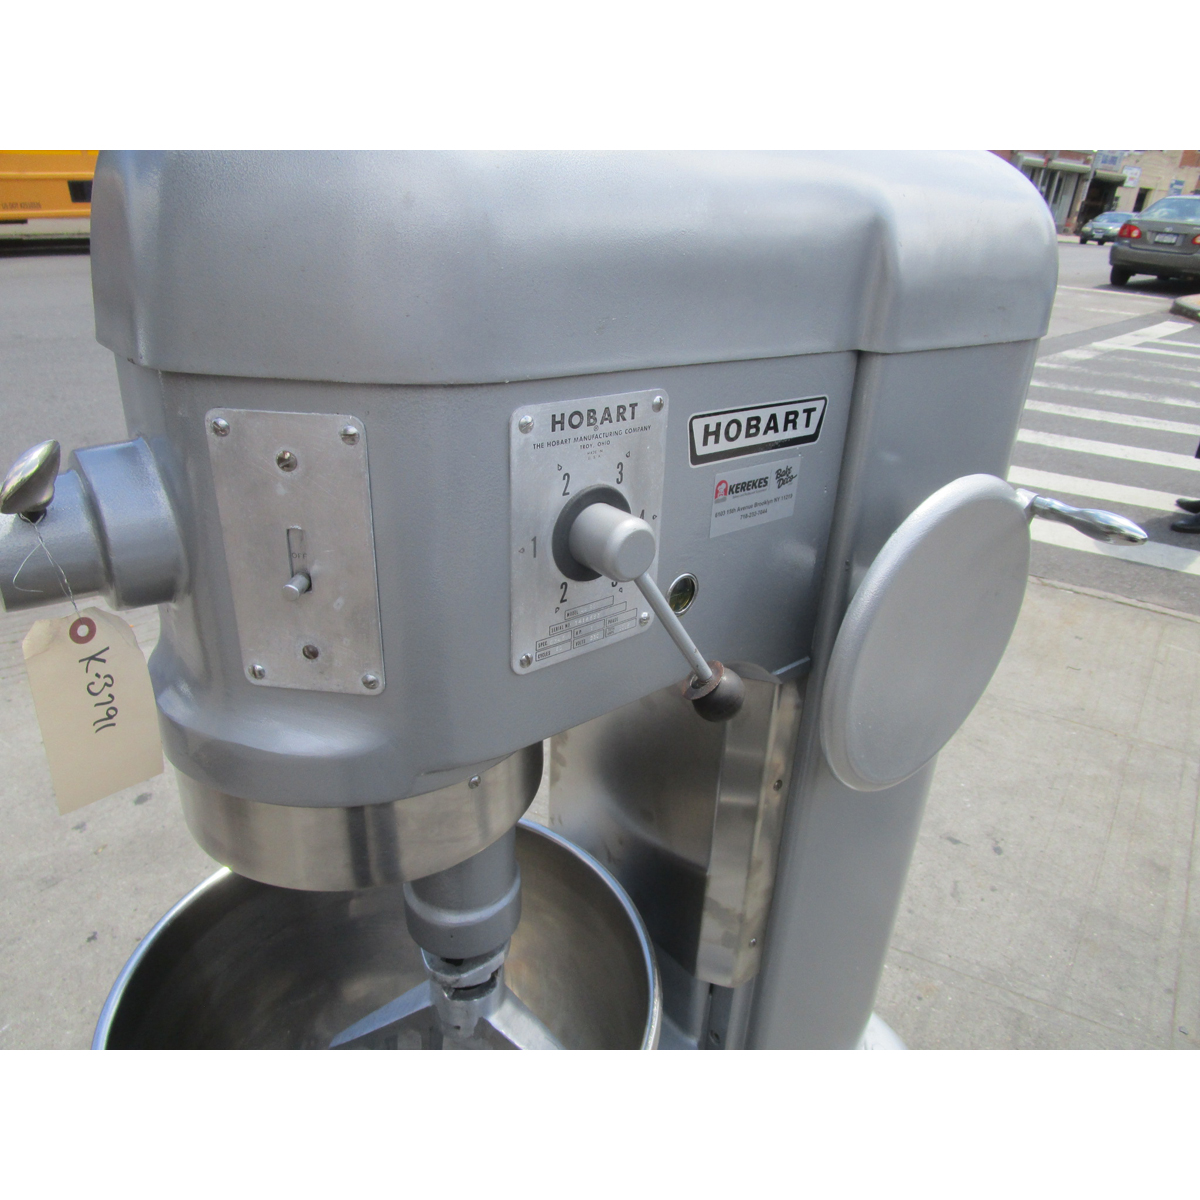 Hobart H600 60 Quart Mixer, Used Great Condition image 1